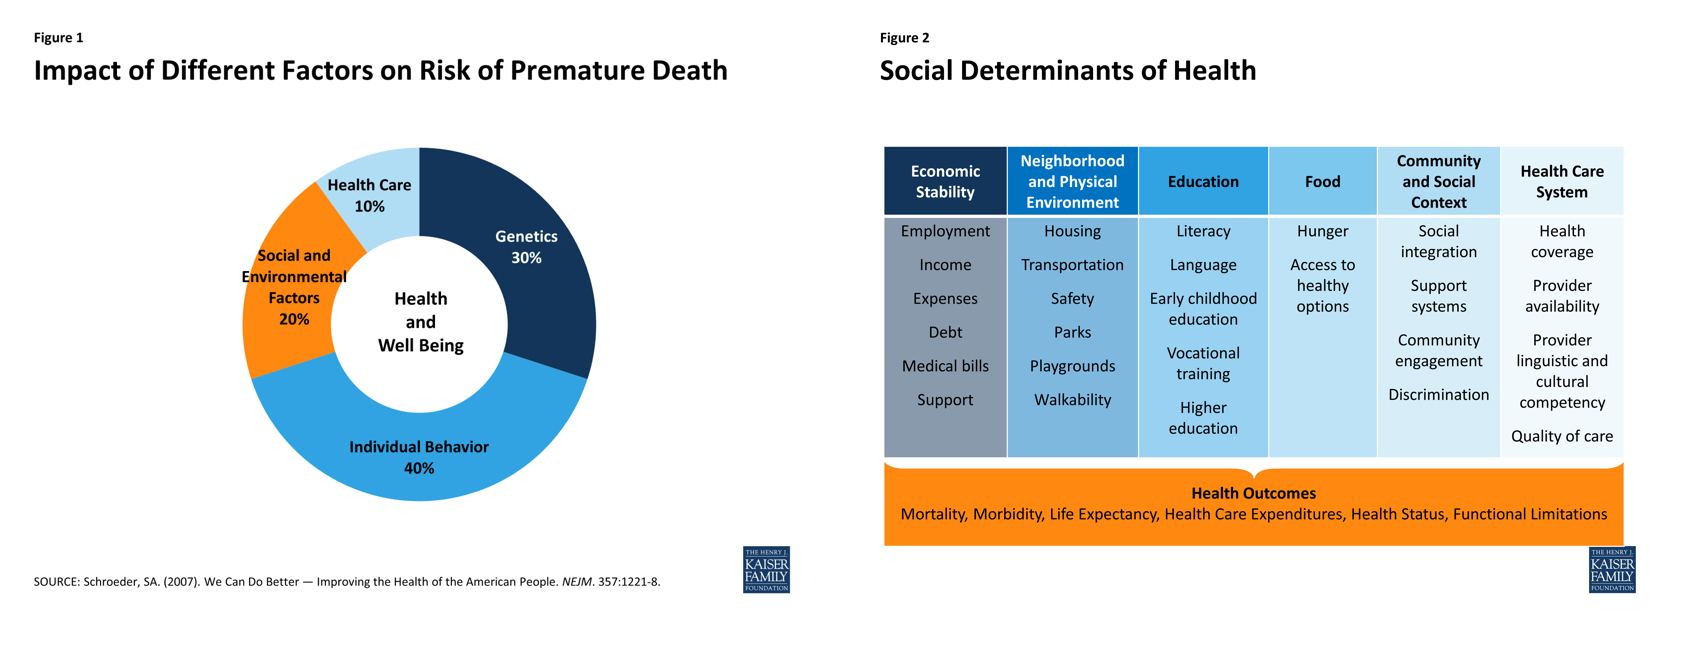 Image source:http://kff.org/disparities-policy/issue-brief/beyond-health-care-the-role-of-social-determinants-in-promoting-health-and-health-equity/